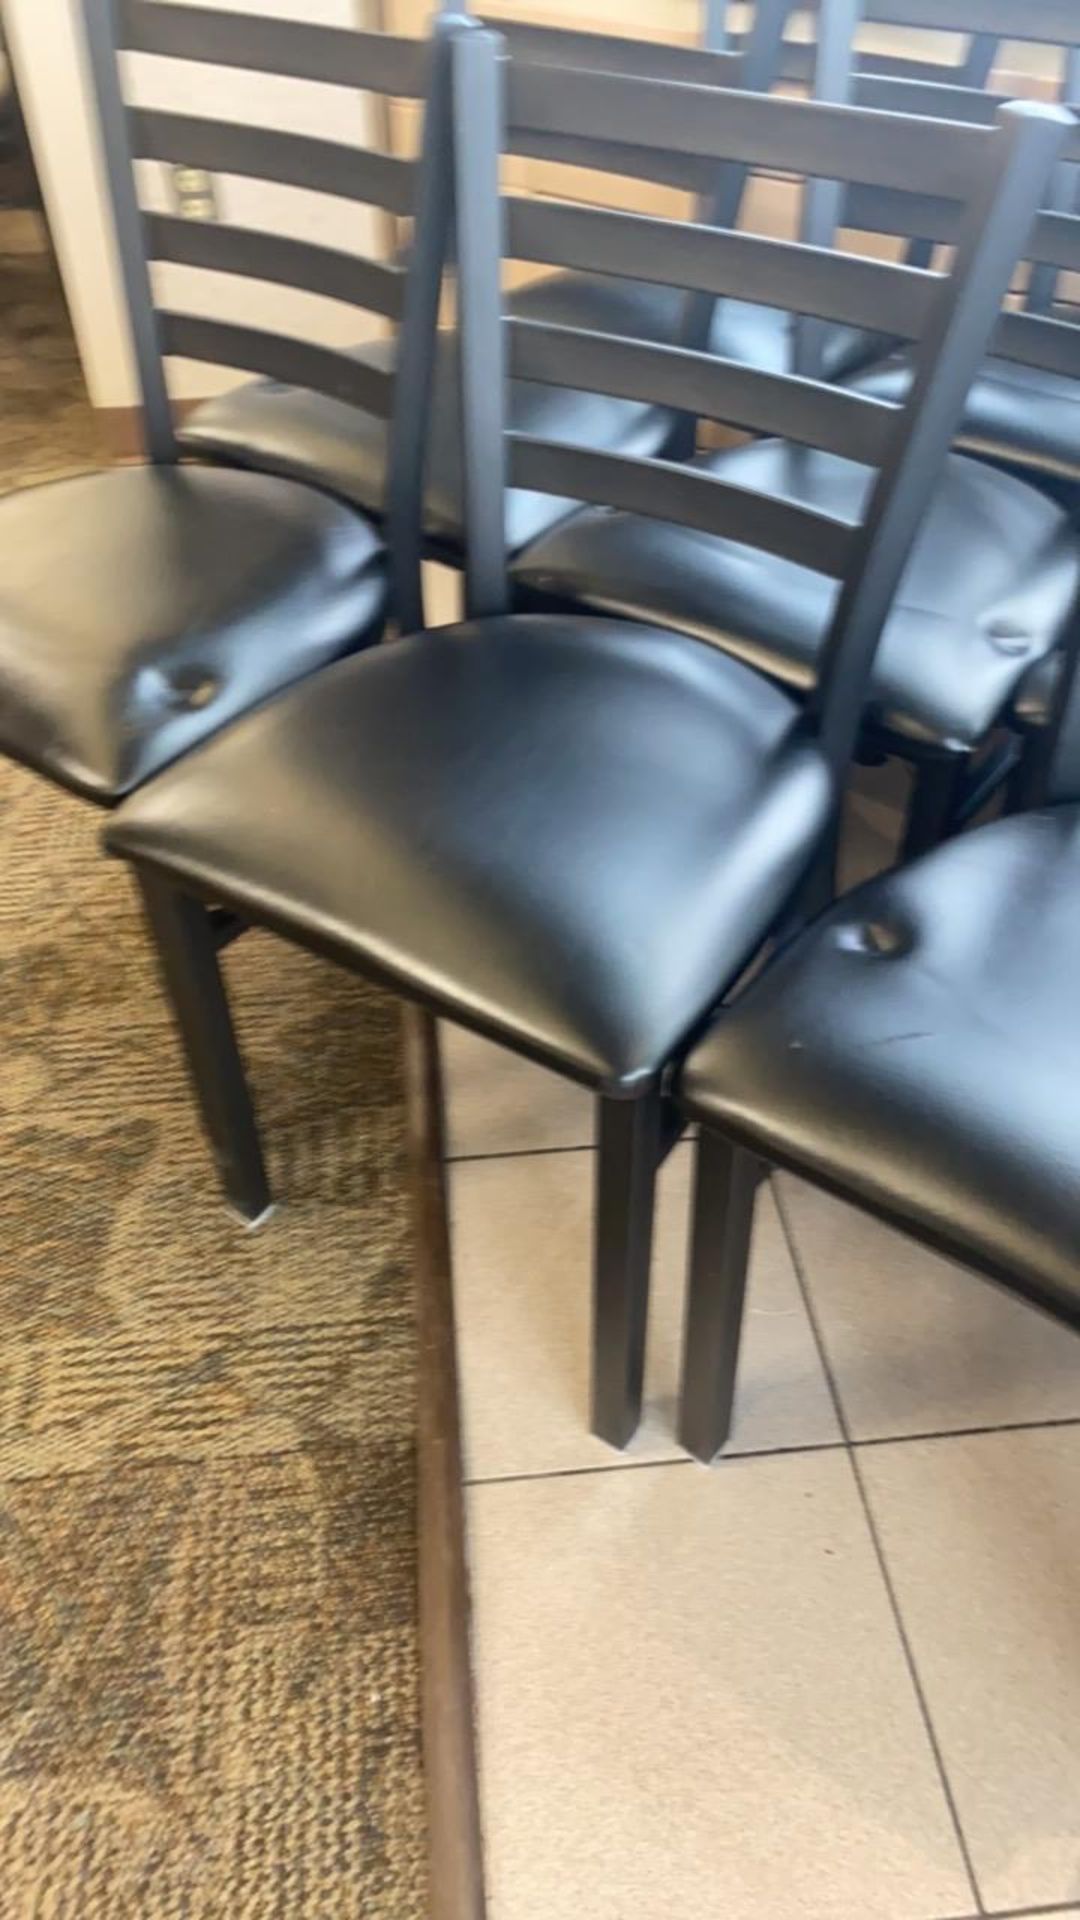 LOT OF 18 CAFETERIA CHAIRS - Image 3 of 3